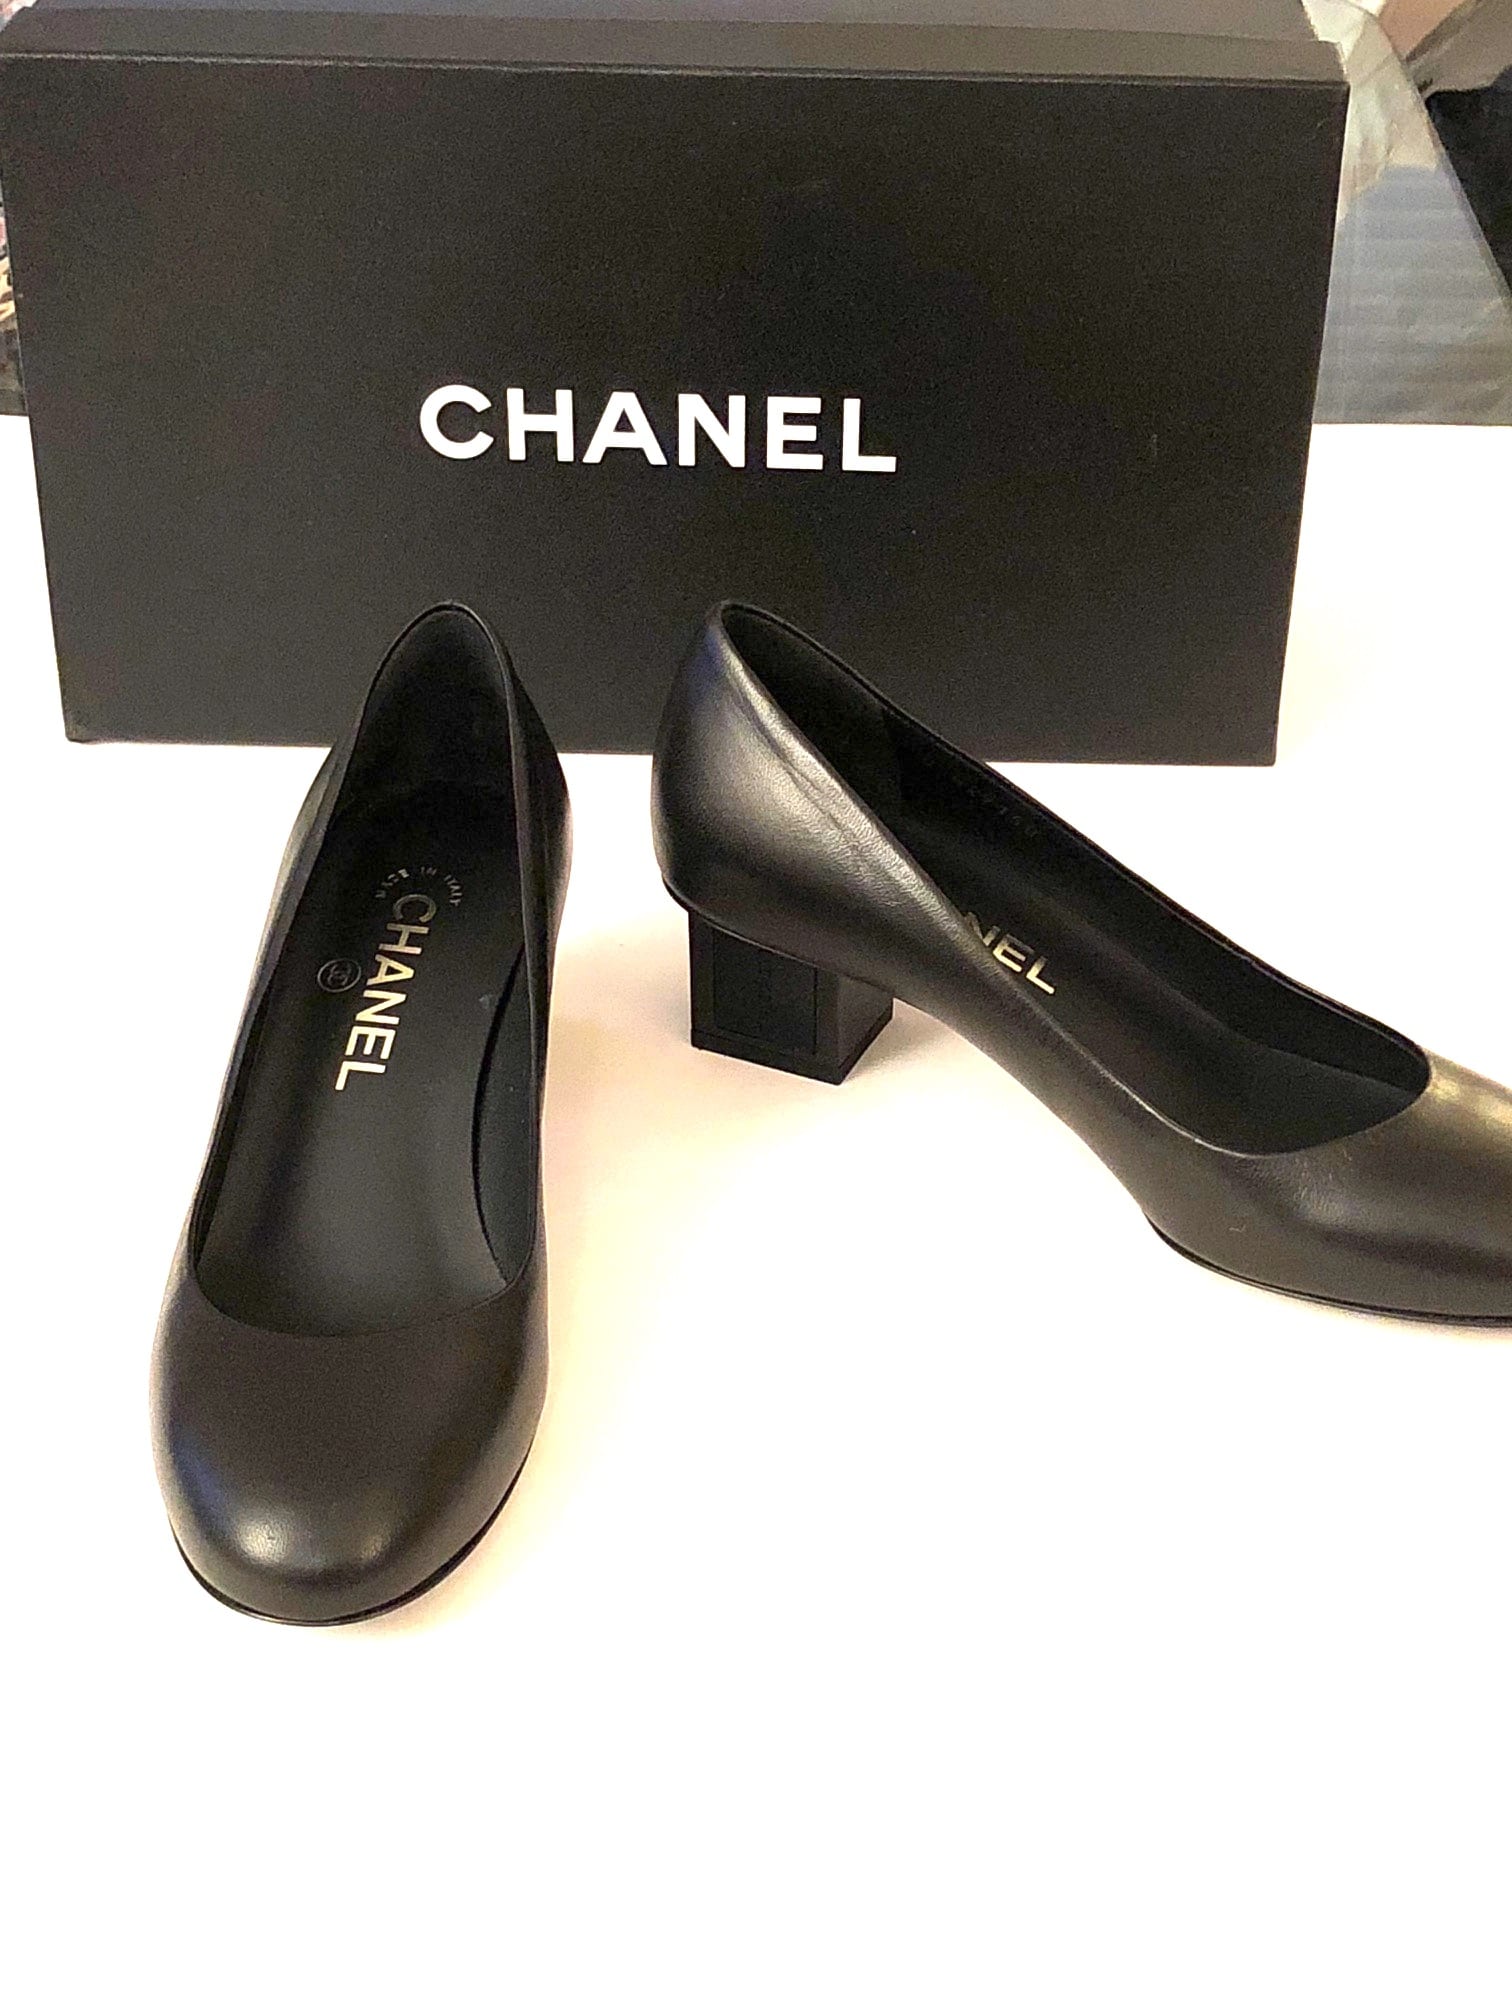 CHANEL, BLACK LEATHER PUMP WITH SQUARE HEEL  NEW IN BOX-SIZE-37, LOVE!!!!!